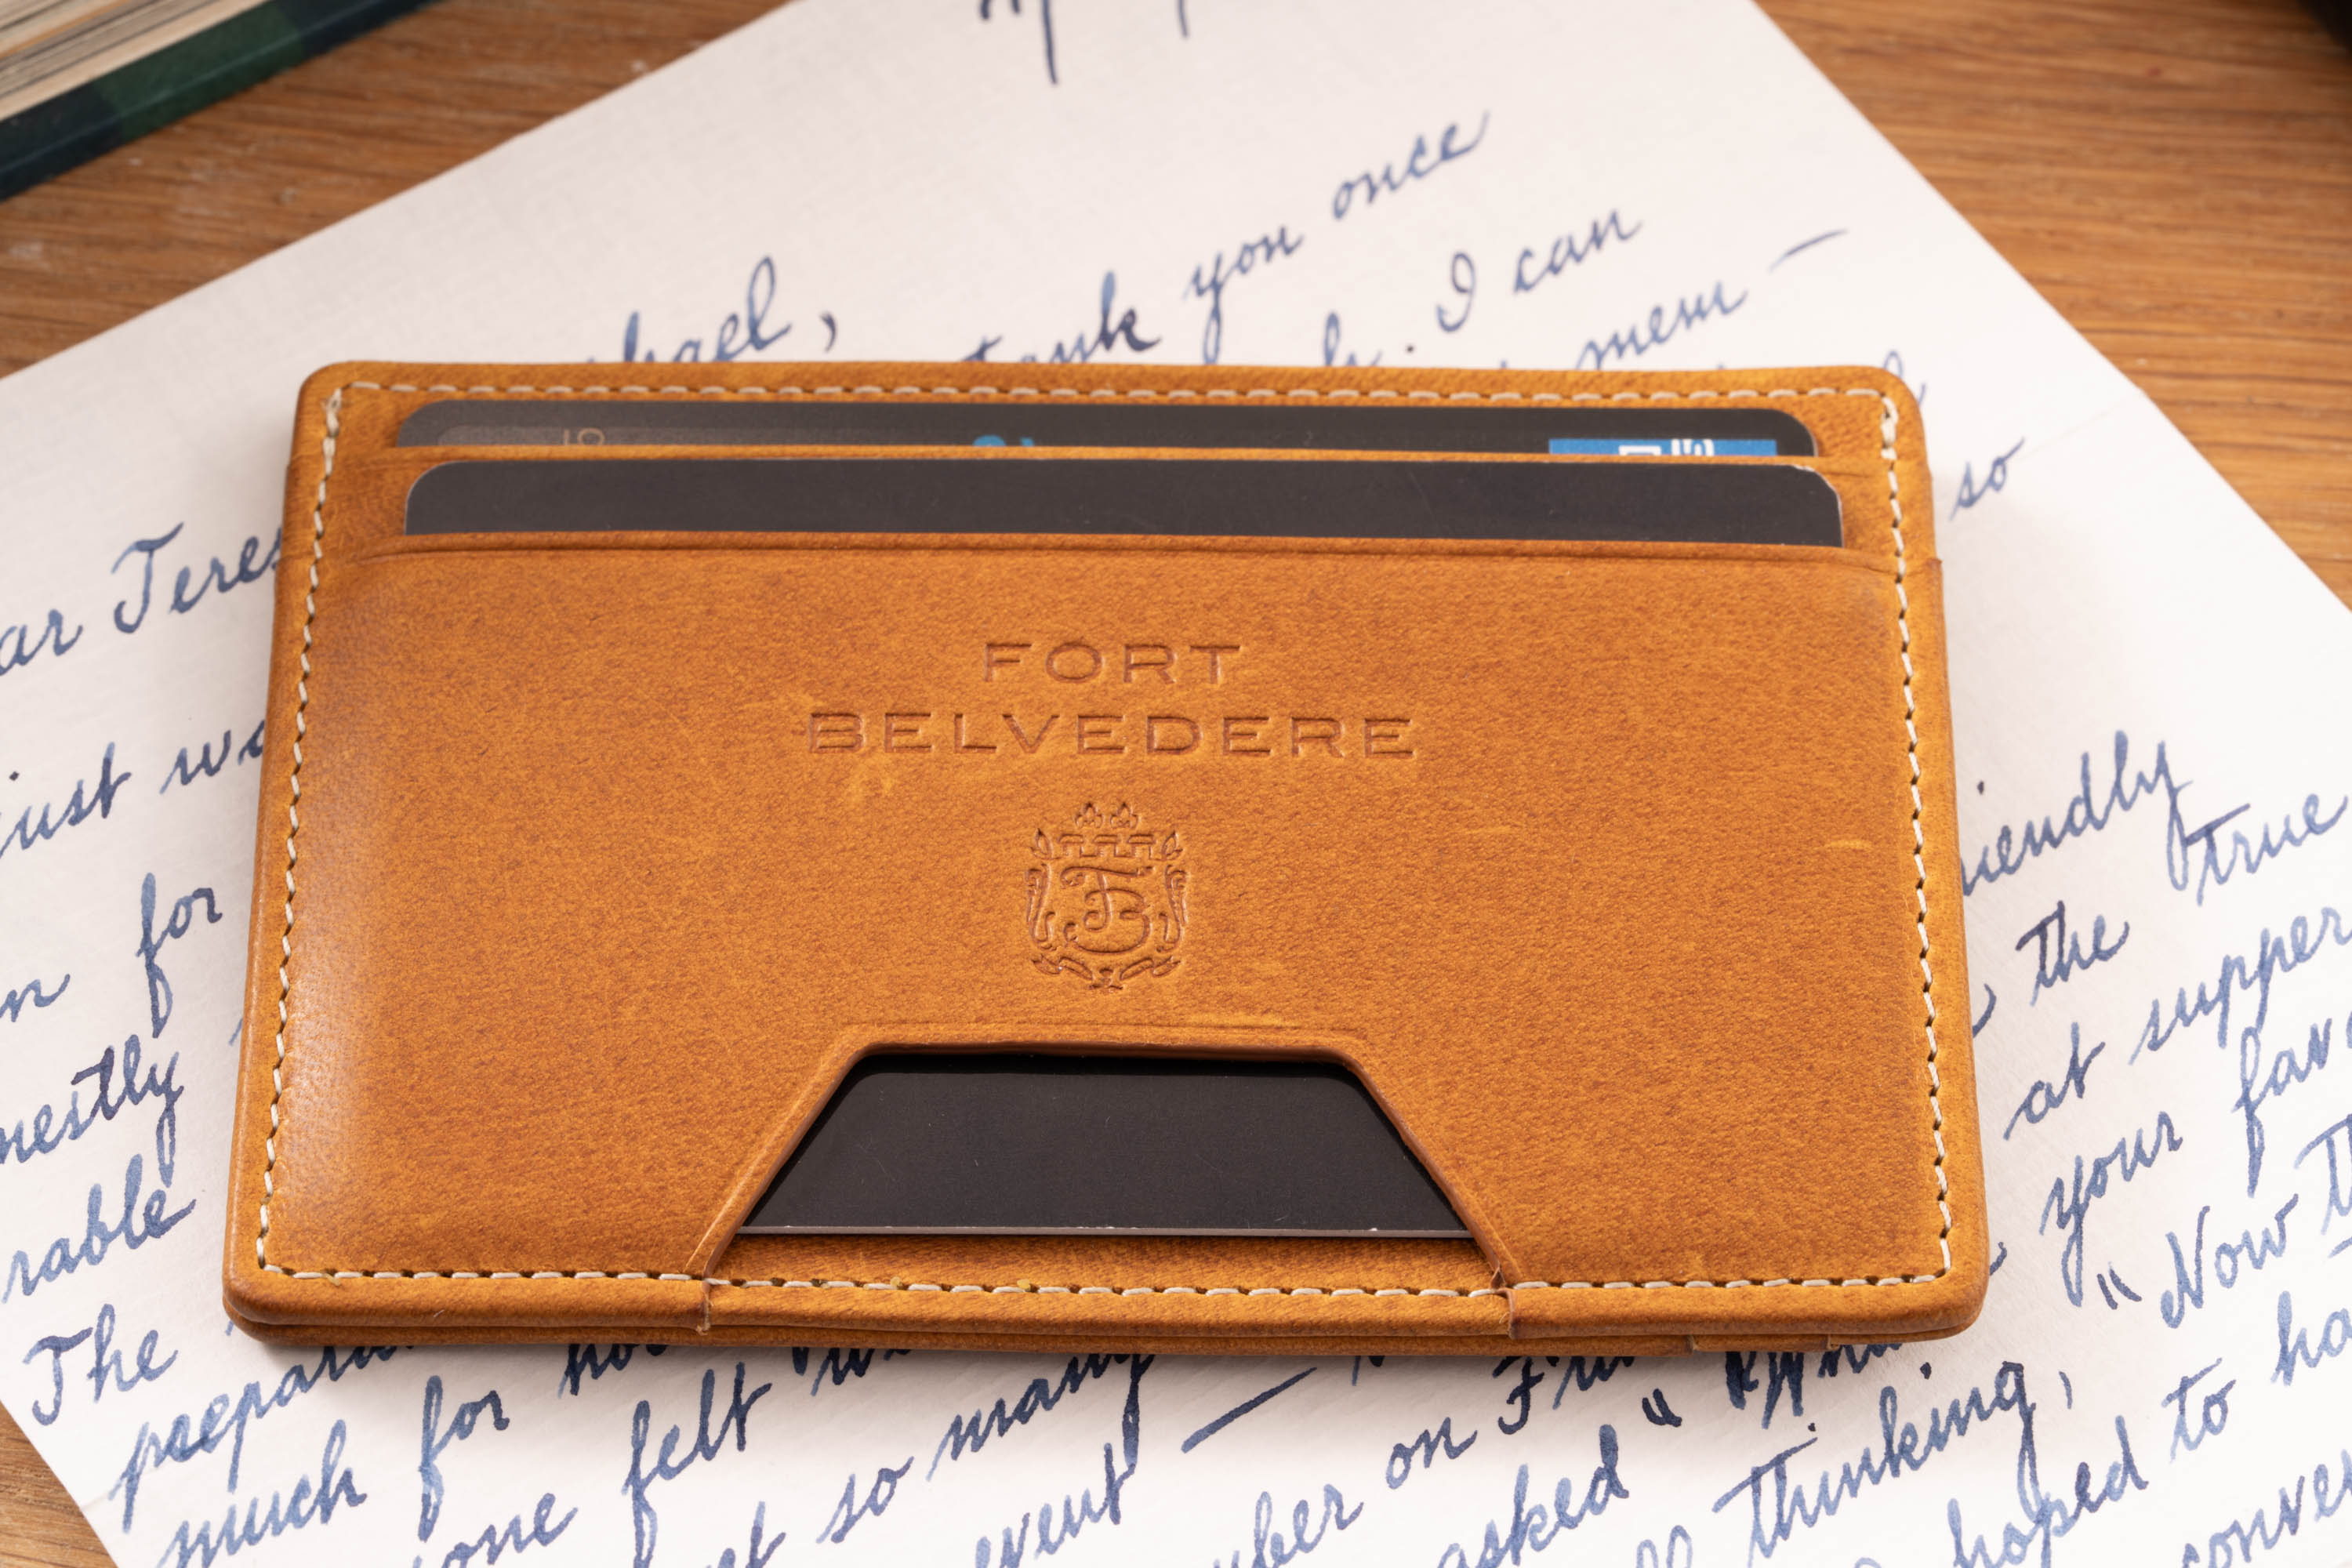 Slim Wallet - 4CC - Americana Vintage Gold Full-Grain Leather was extensively tested to ensure a high-quality product. 